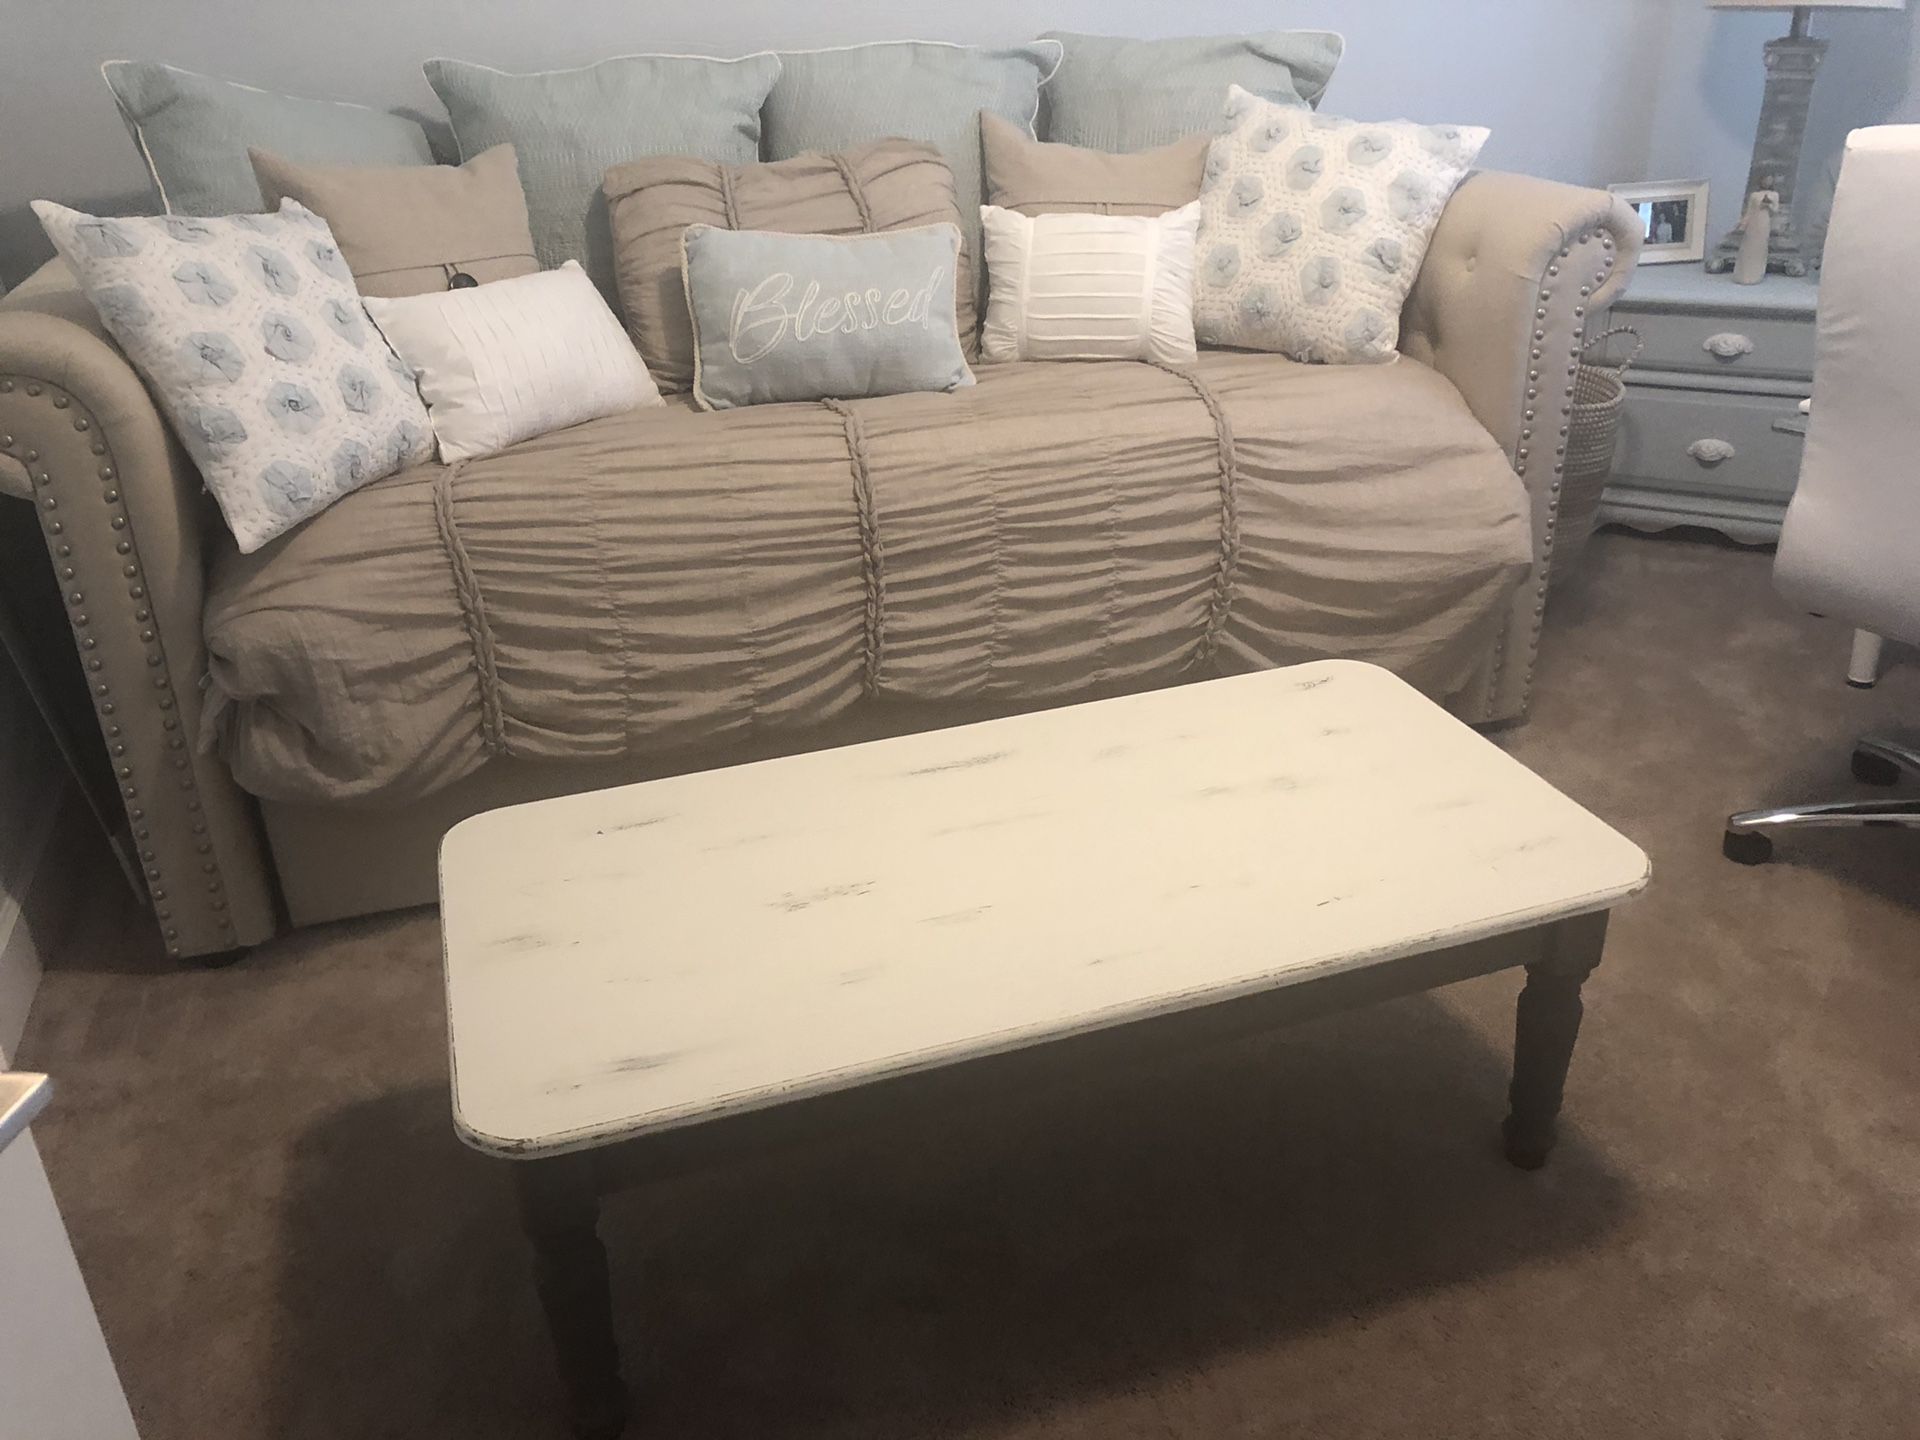 Distressed/farmhouse style coffee table